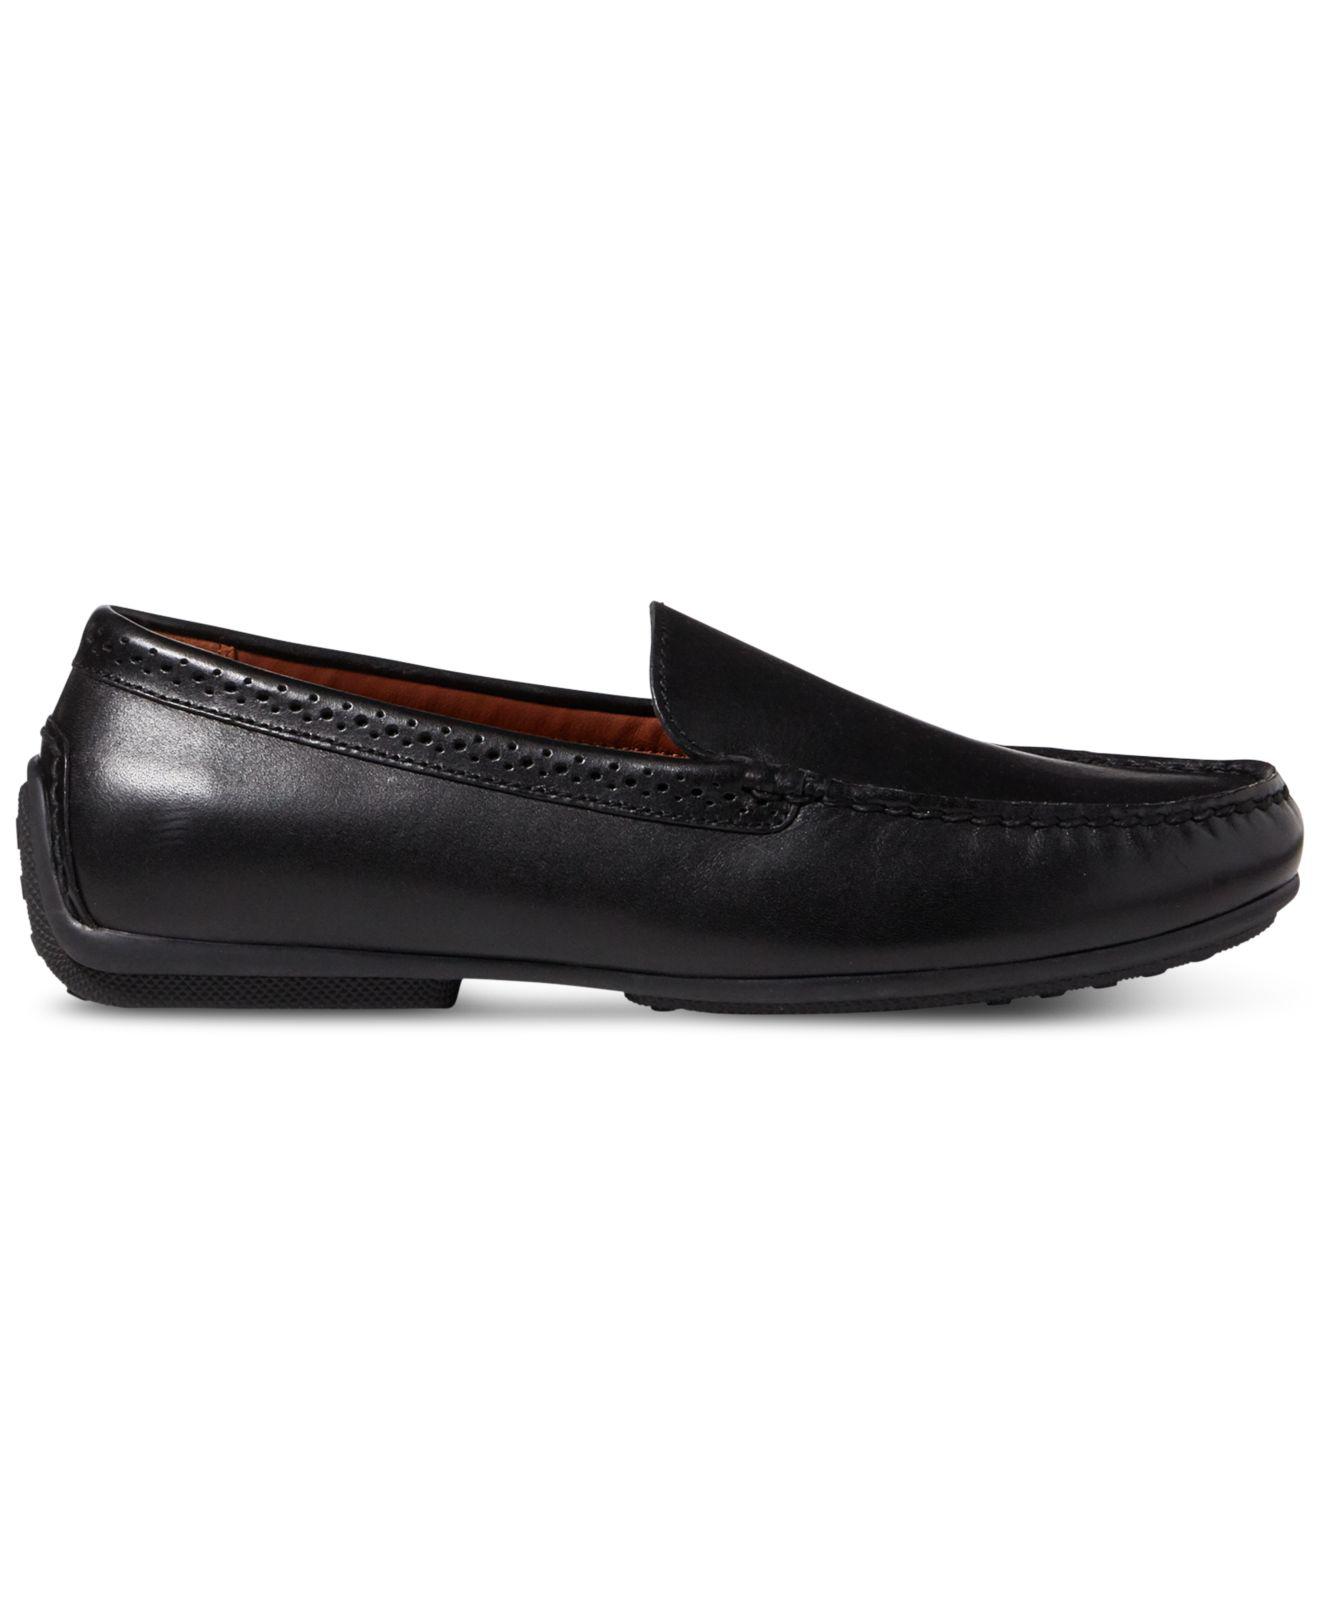 Polo Ralph Lauren Redden Leather Moc Drivers in Black for Men - Save 9% ...